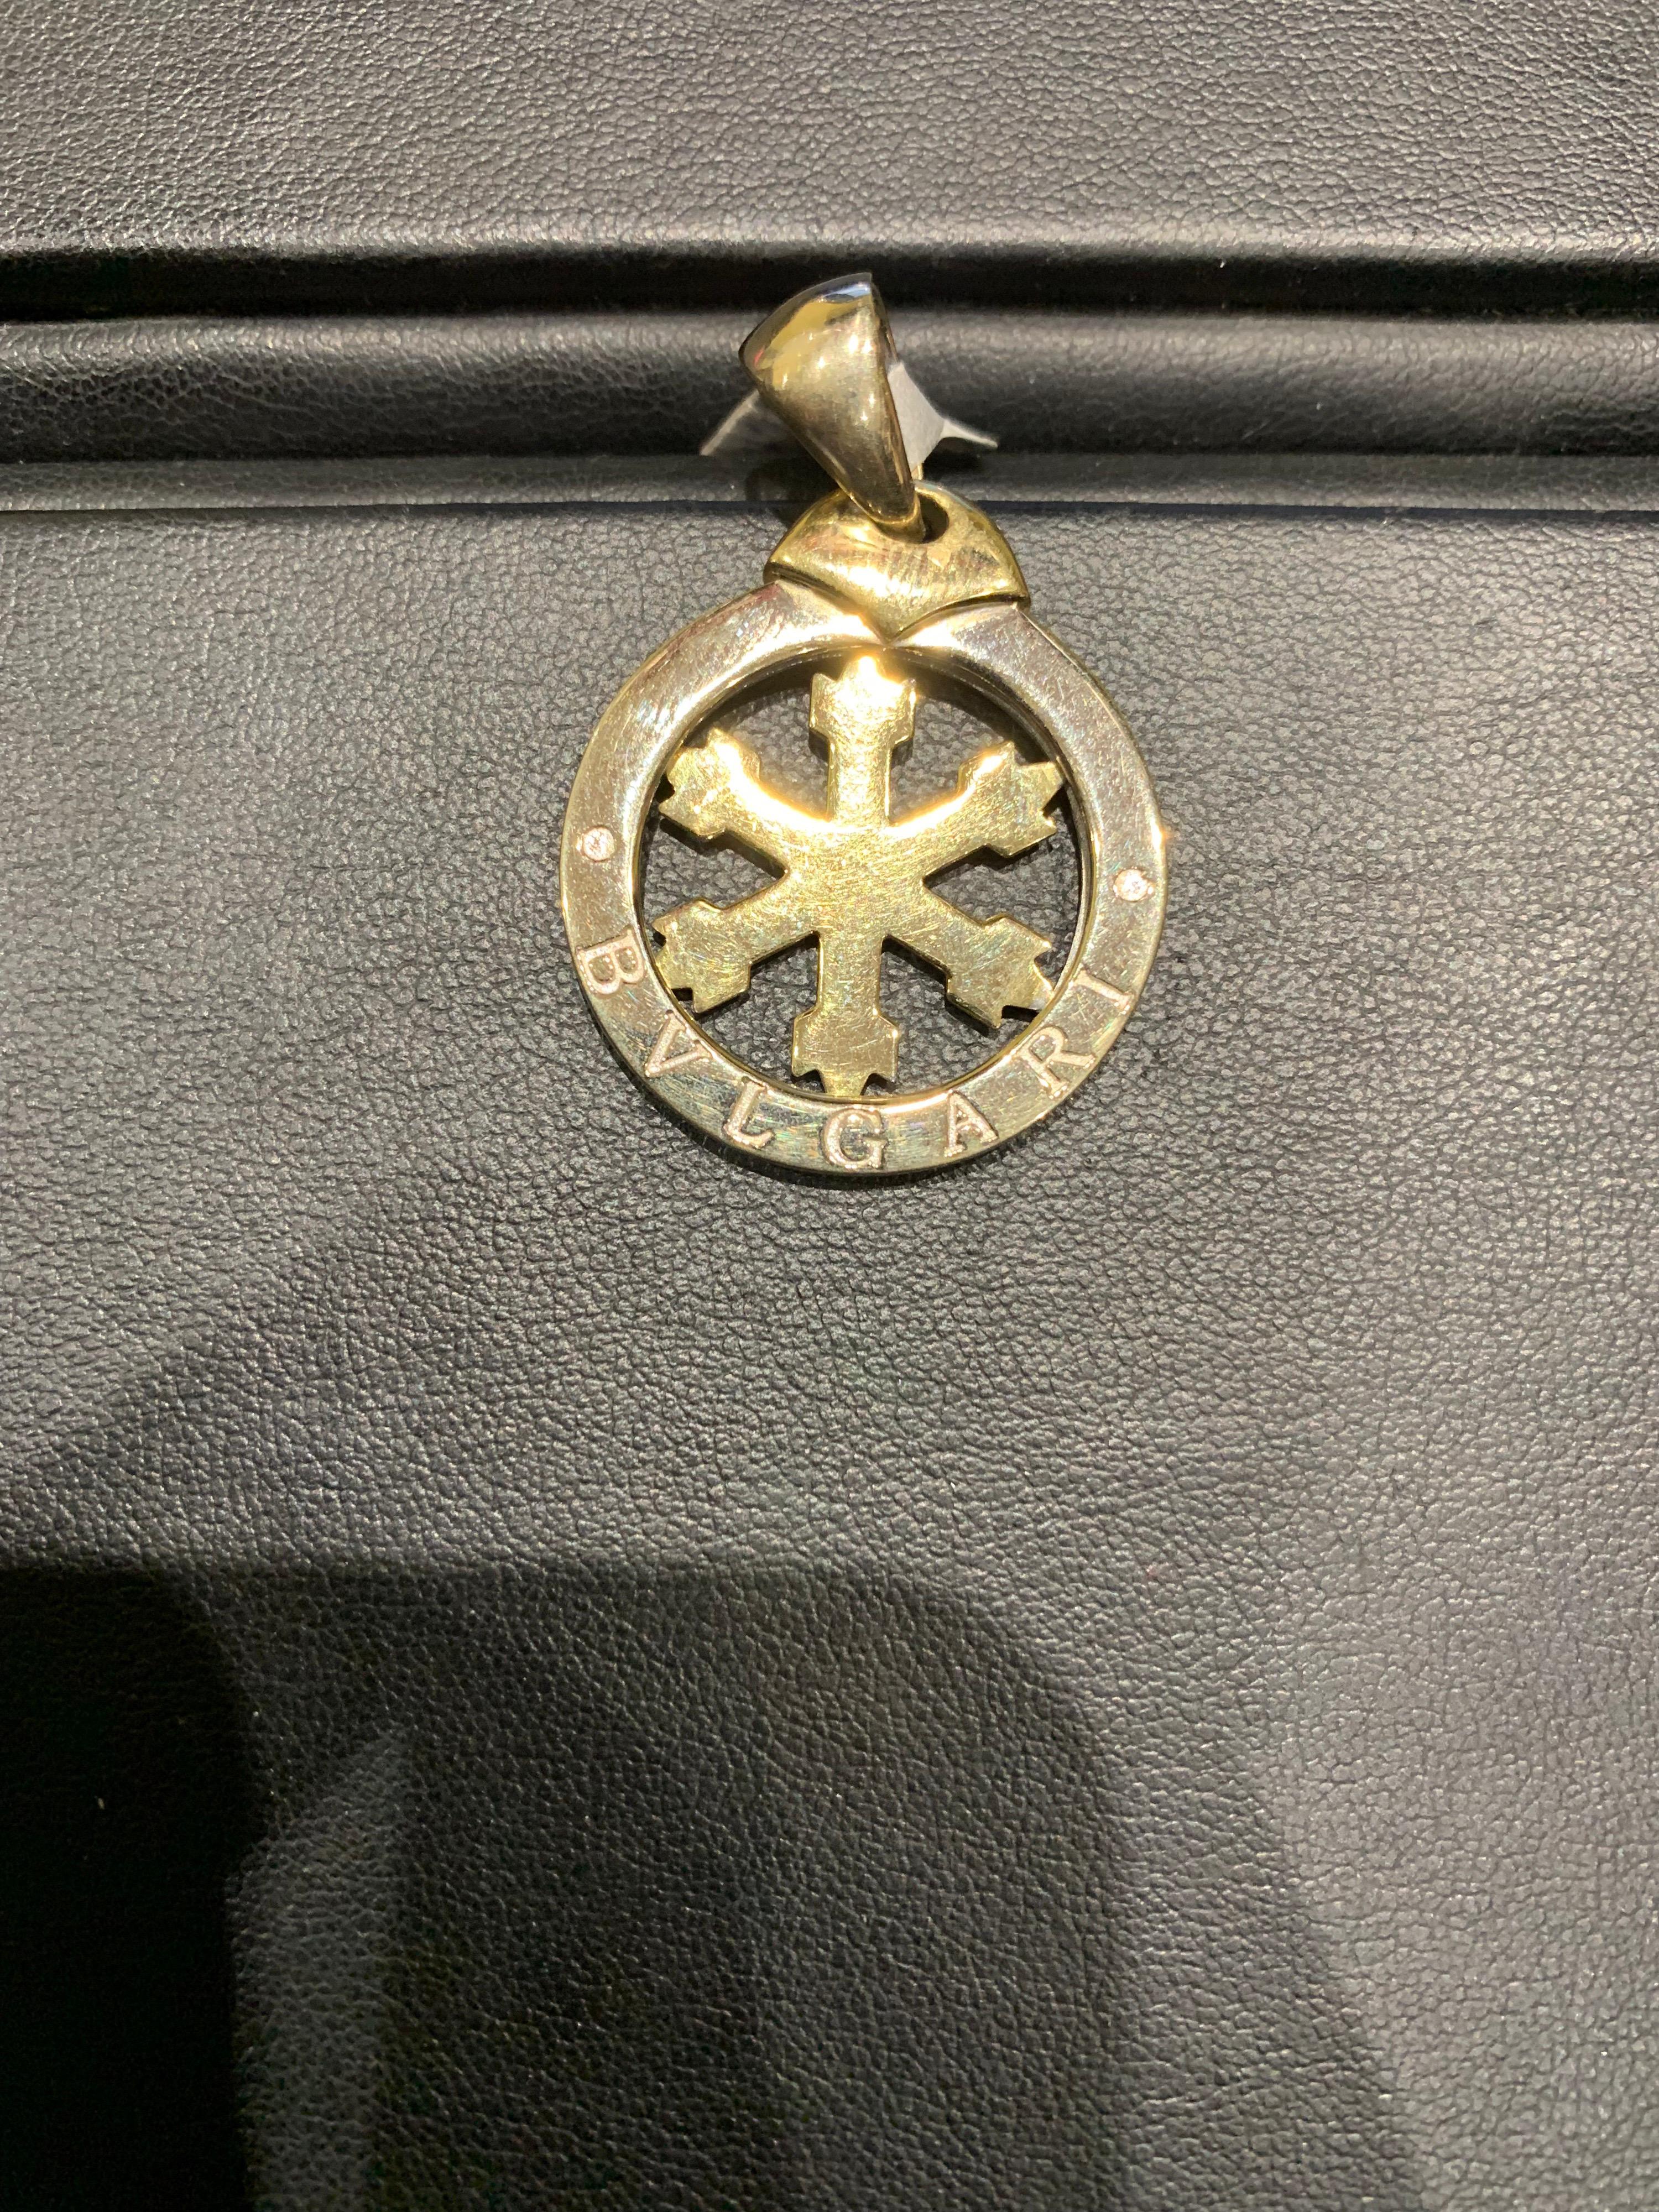 A snowflake stainless steel and 18k yellow gold Bvlgari Tondo pendant. The pendant is centred with an 18k yellow gold rotating snowflake design and features 'Bvlgari' engraved around the stainless steel outer edge. The pendant is 3.20cm in length